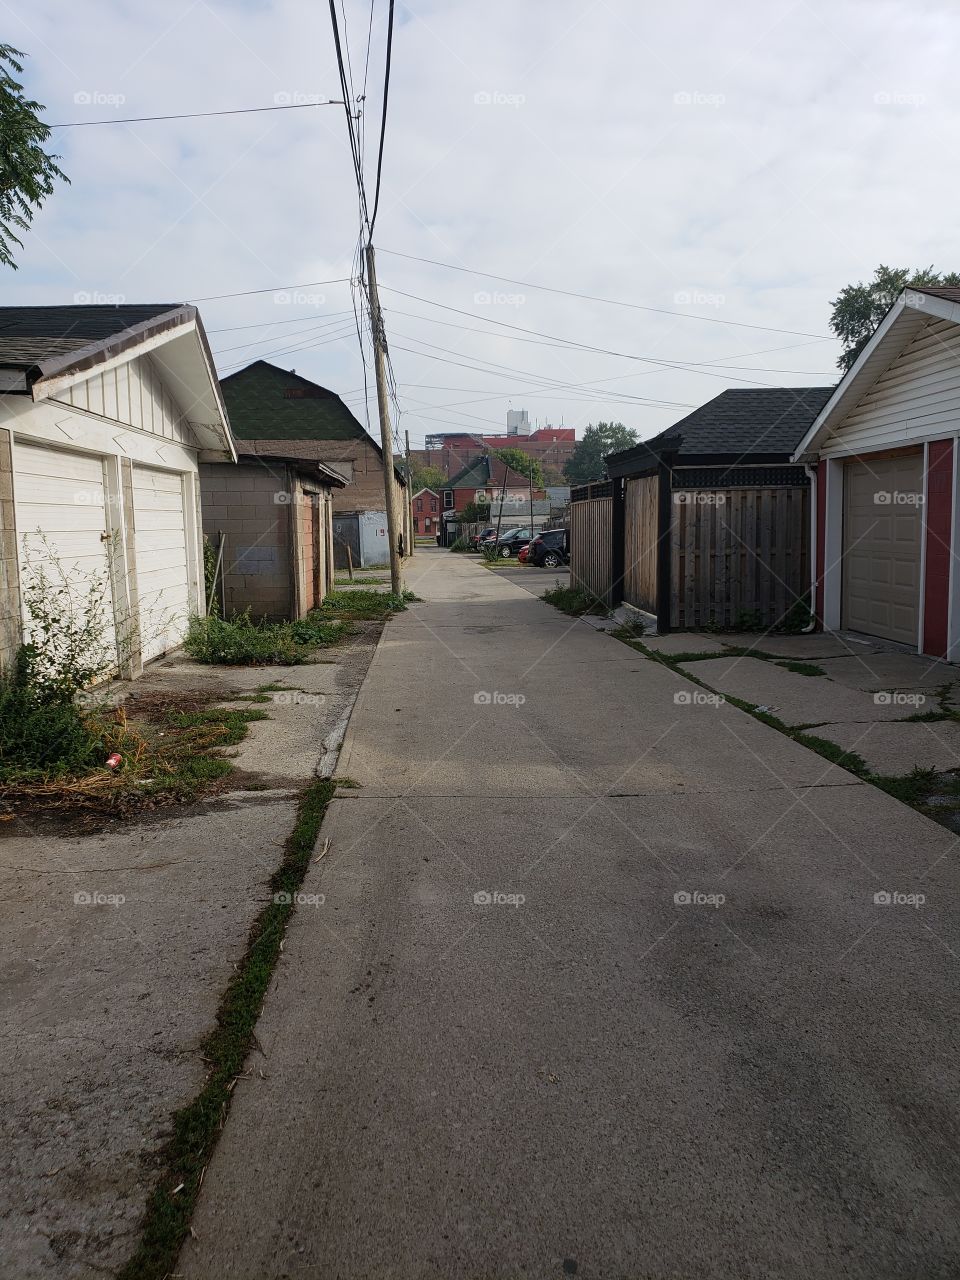 Alleyway in an old run-down neighborhood with garages and electrical wires